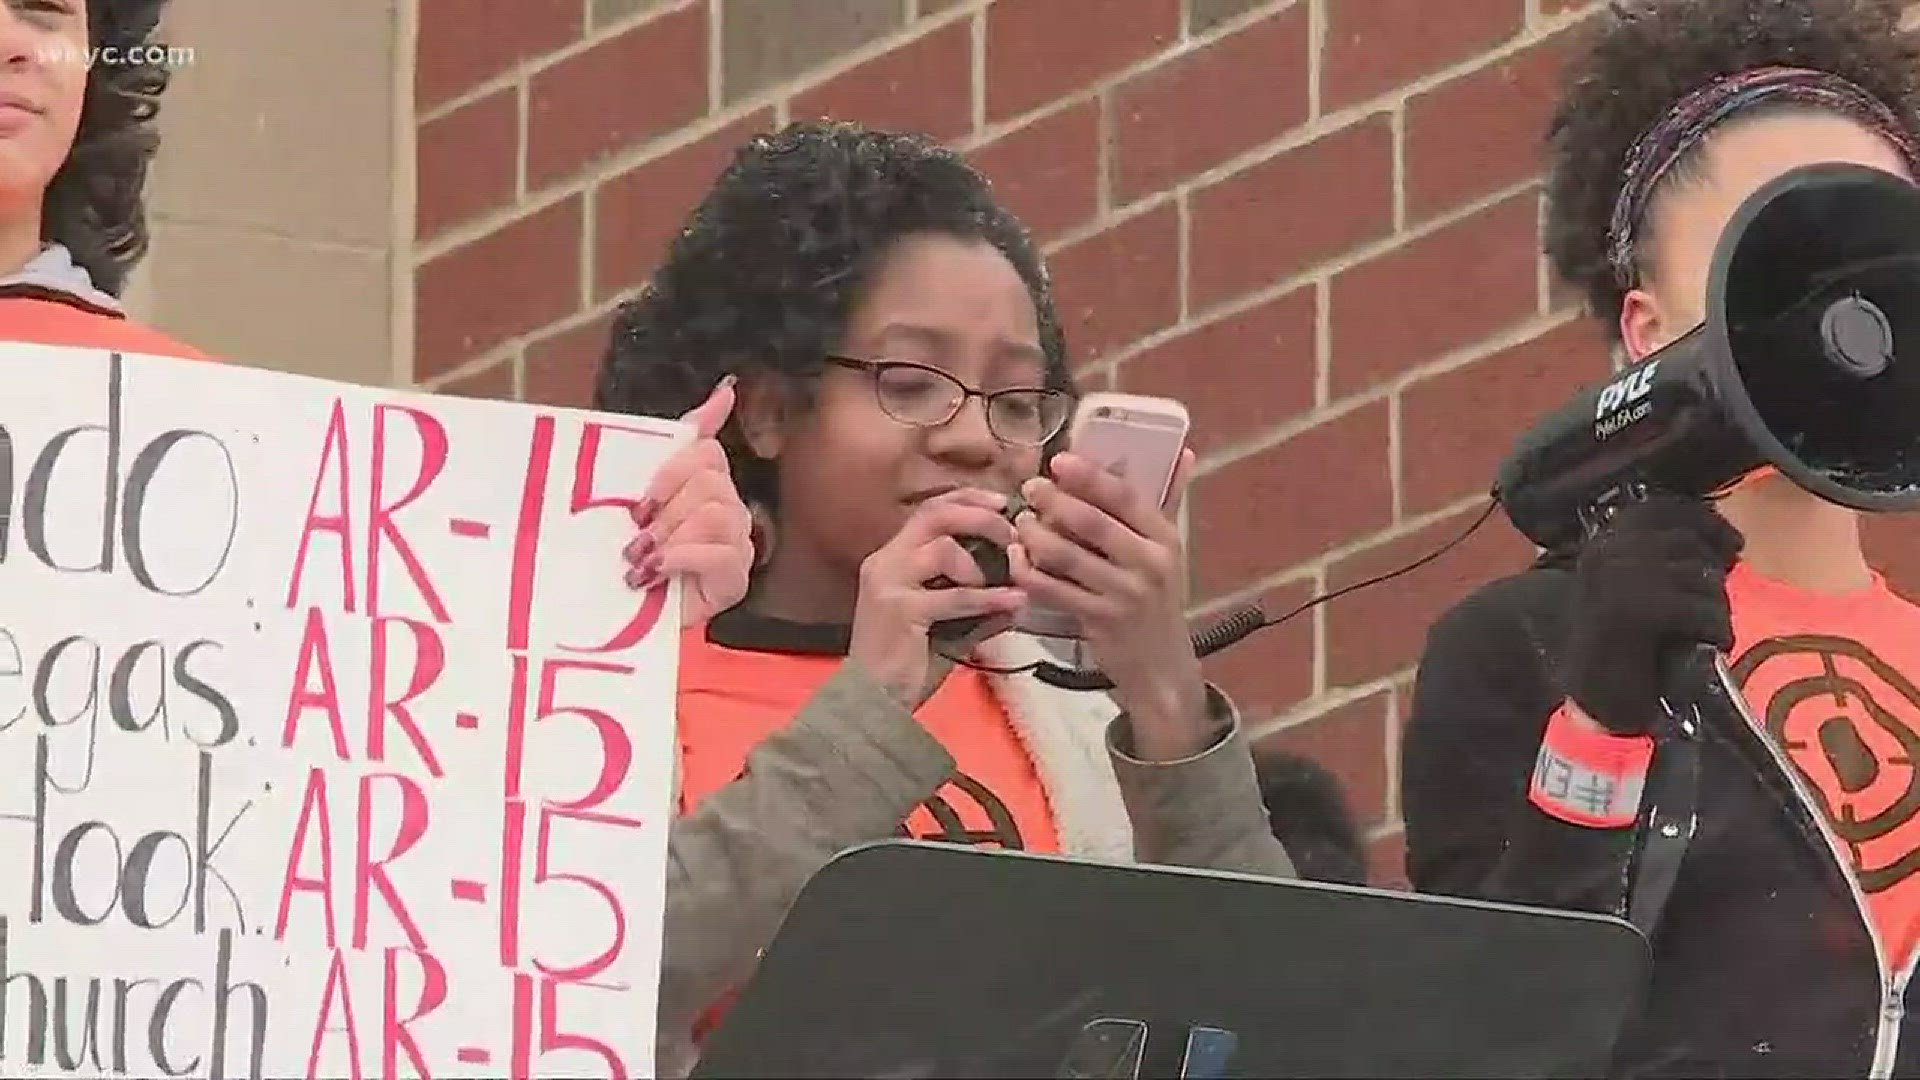 Akron Firestone students wear orange shirts with targets during walkout